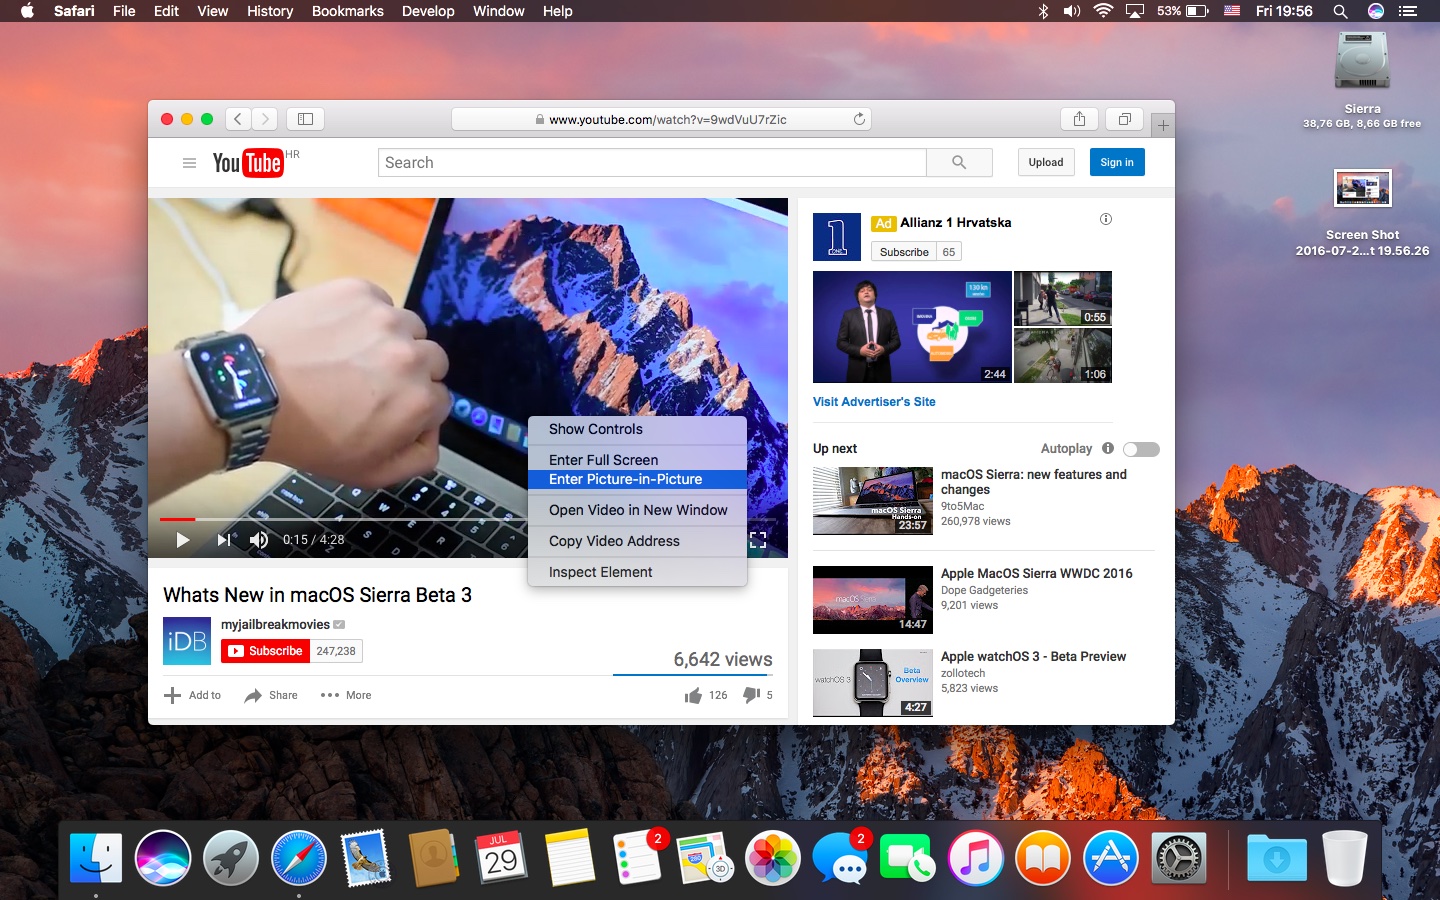 macos-sierra-picture-in-picture-enable-on-youtube-mac-screenshot-002